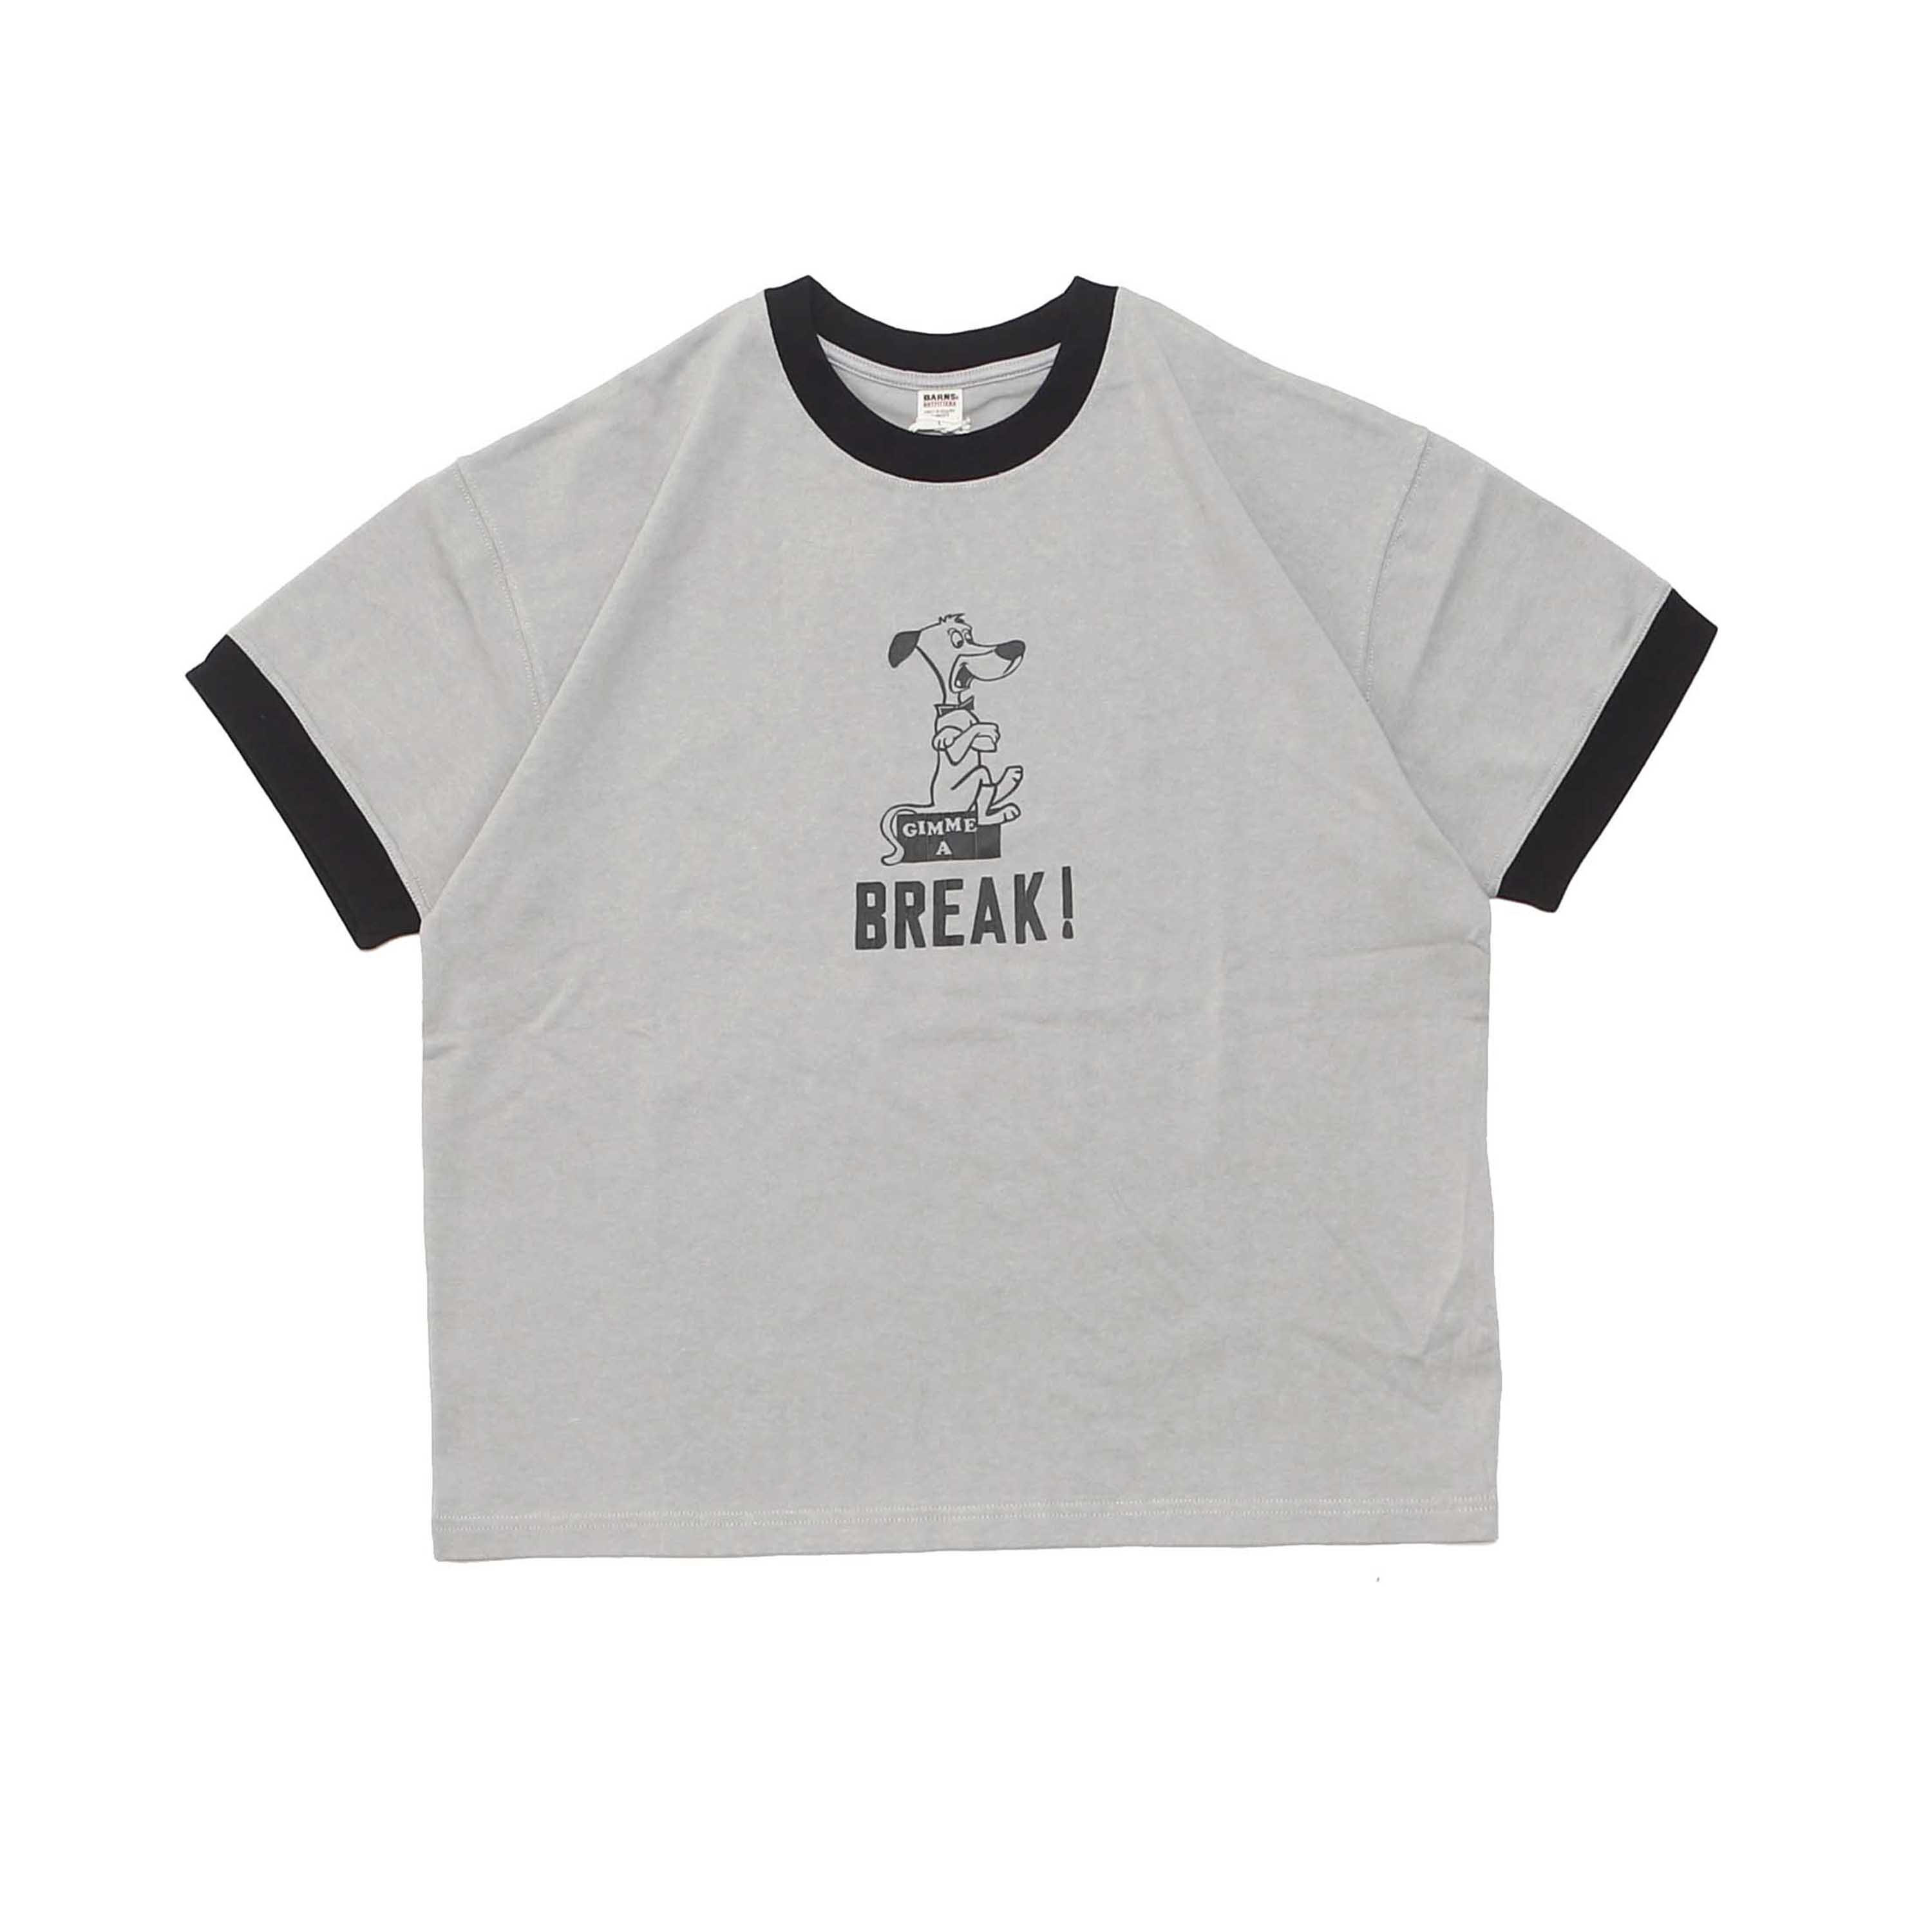 RELAXED FIT RINGER PRINTED S/S TEE - BREAK GRAY(BR-24210)